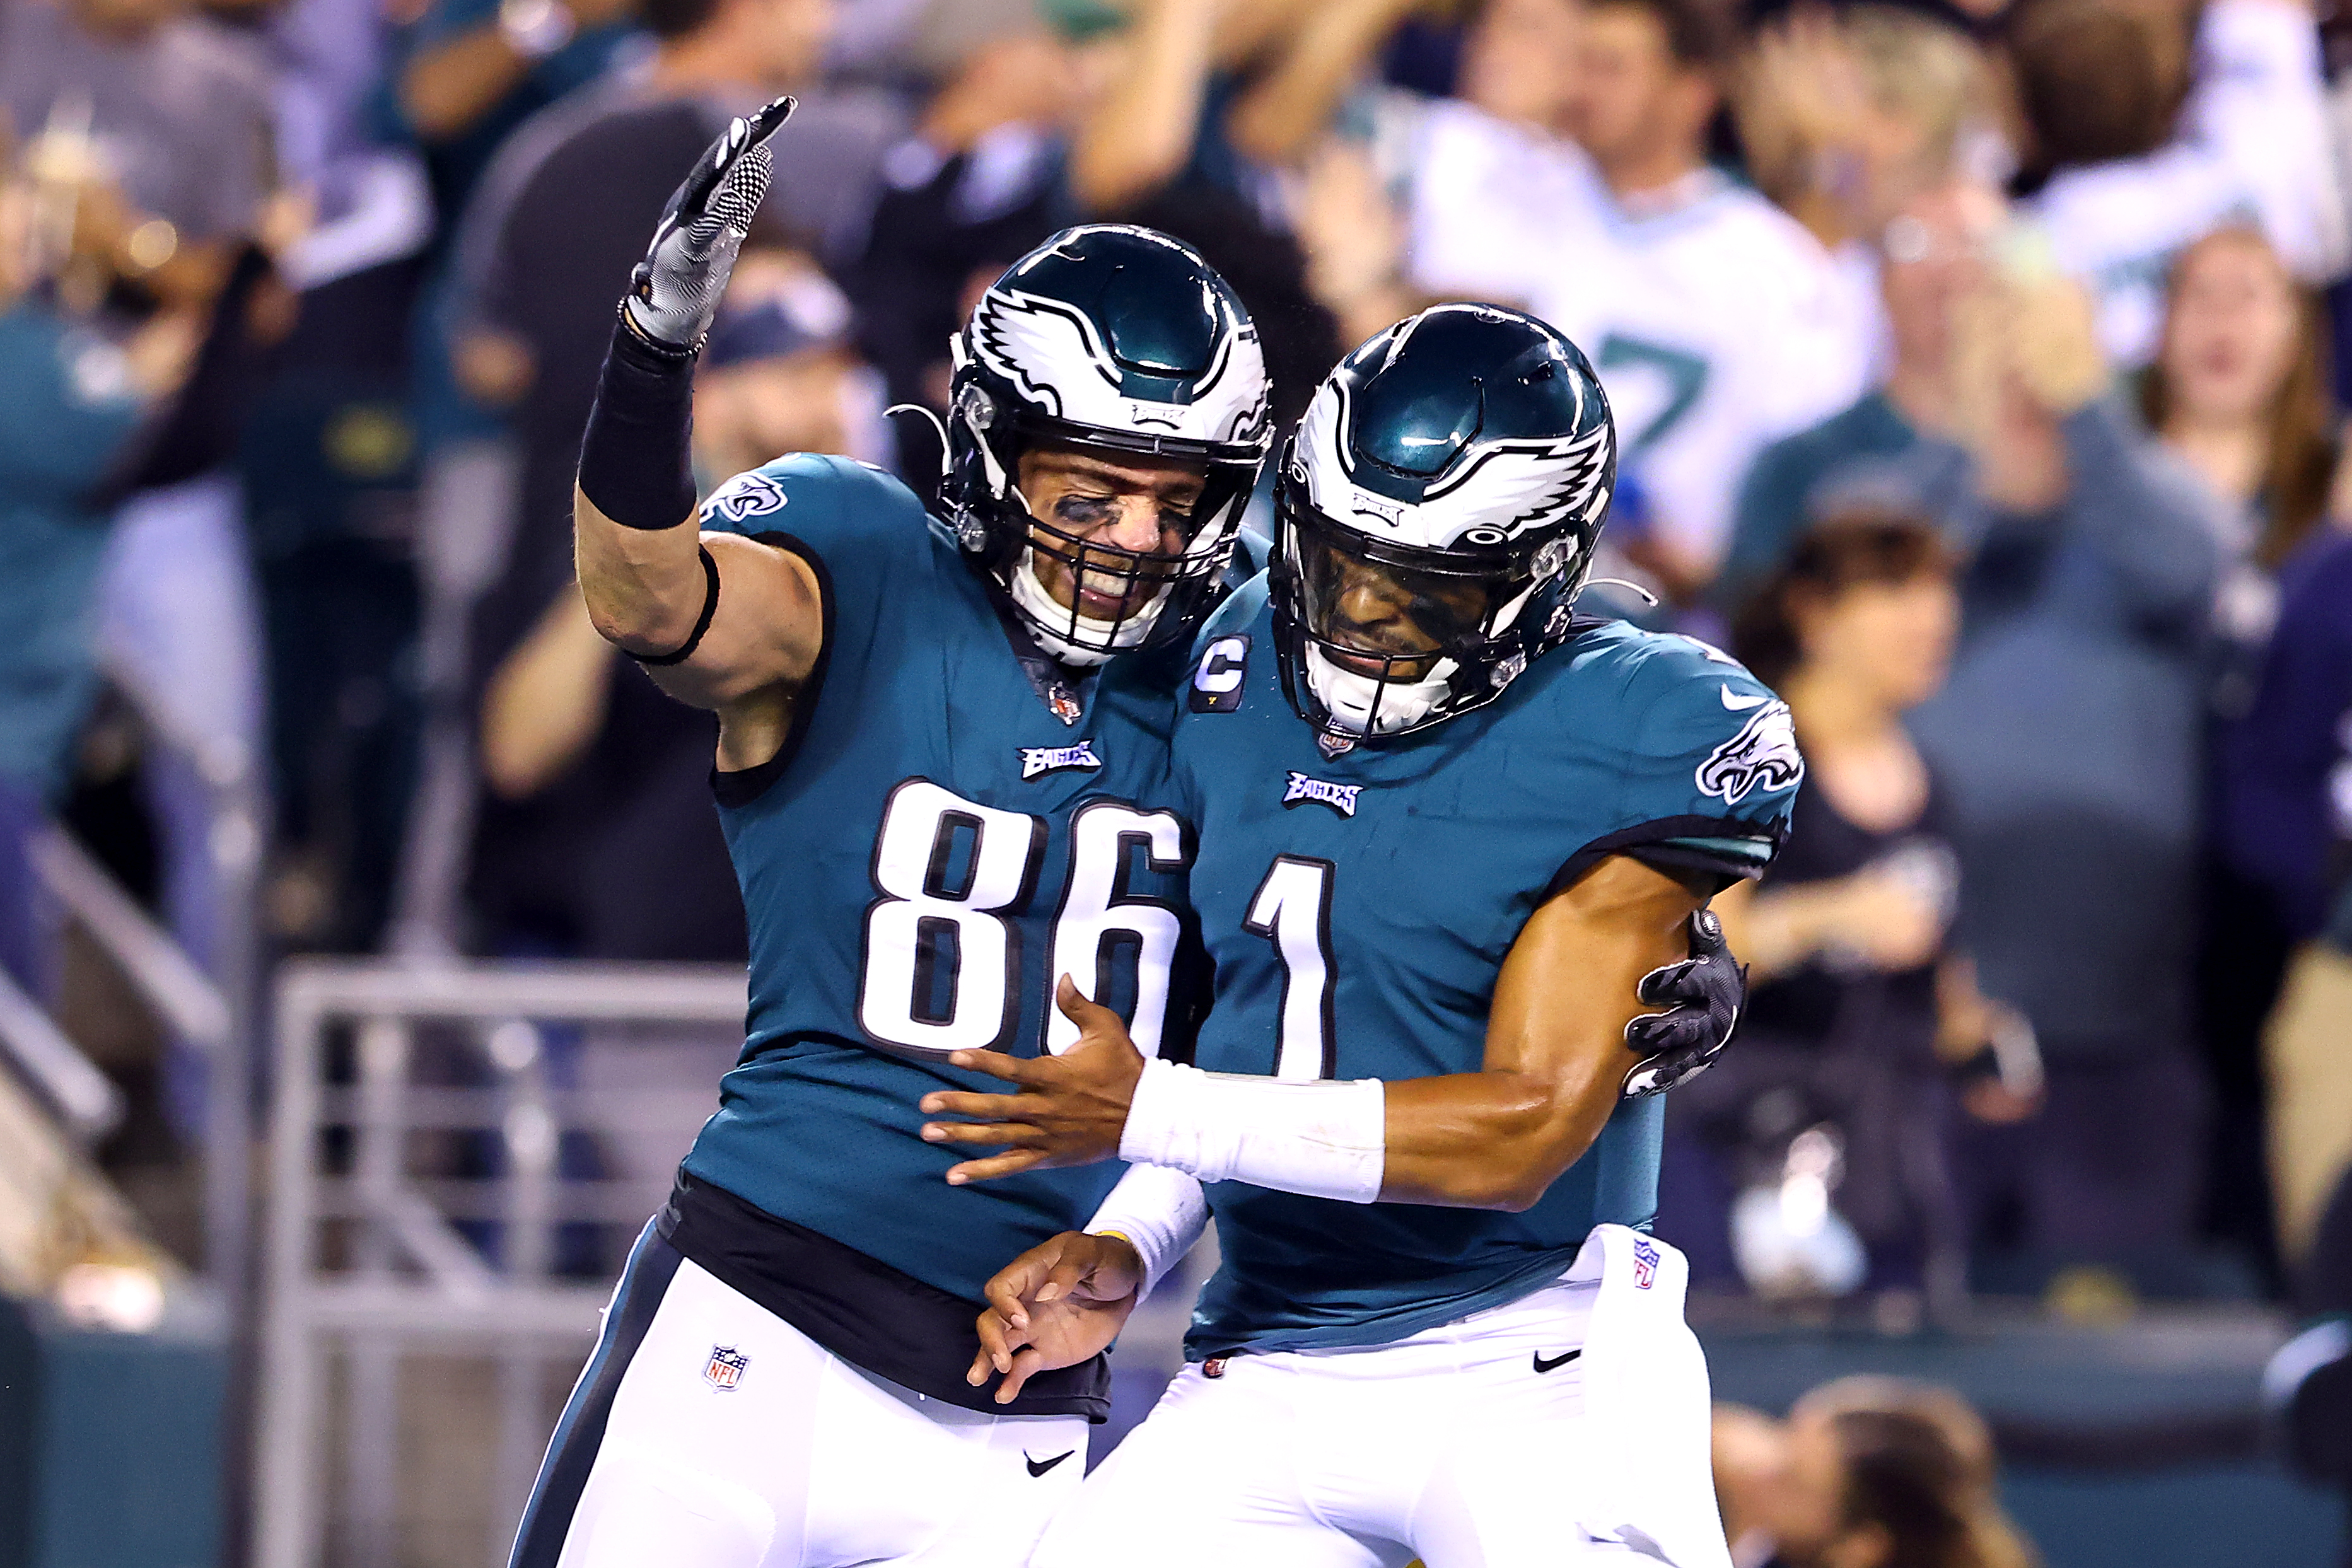 The Eagles traded Zach Ertz to the Cardinals and here he is celebrating a touchdown in October.